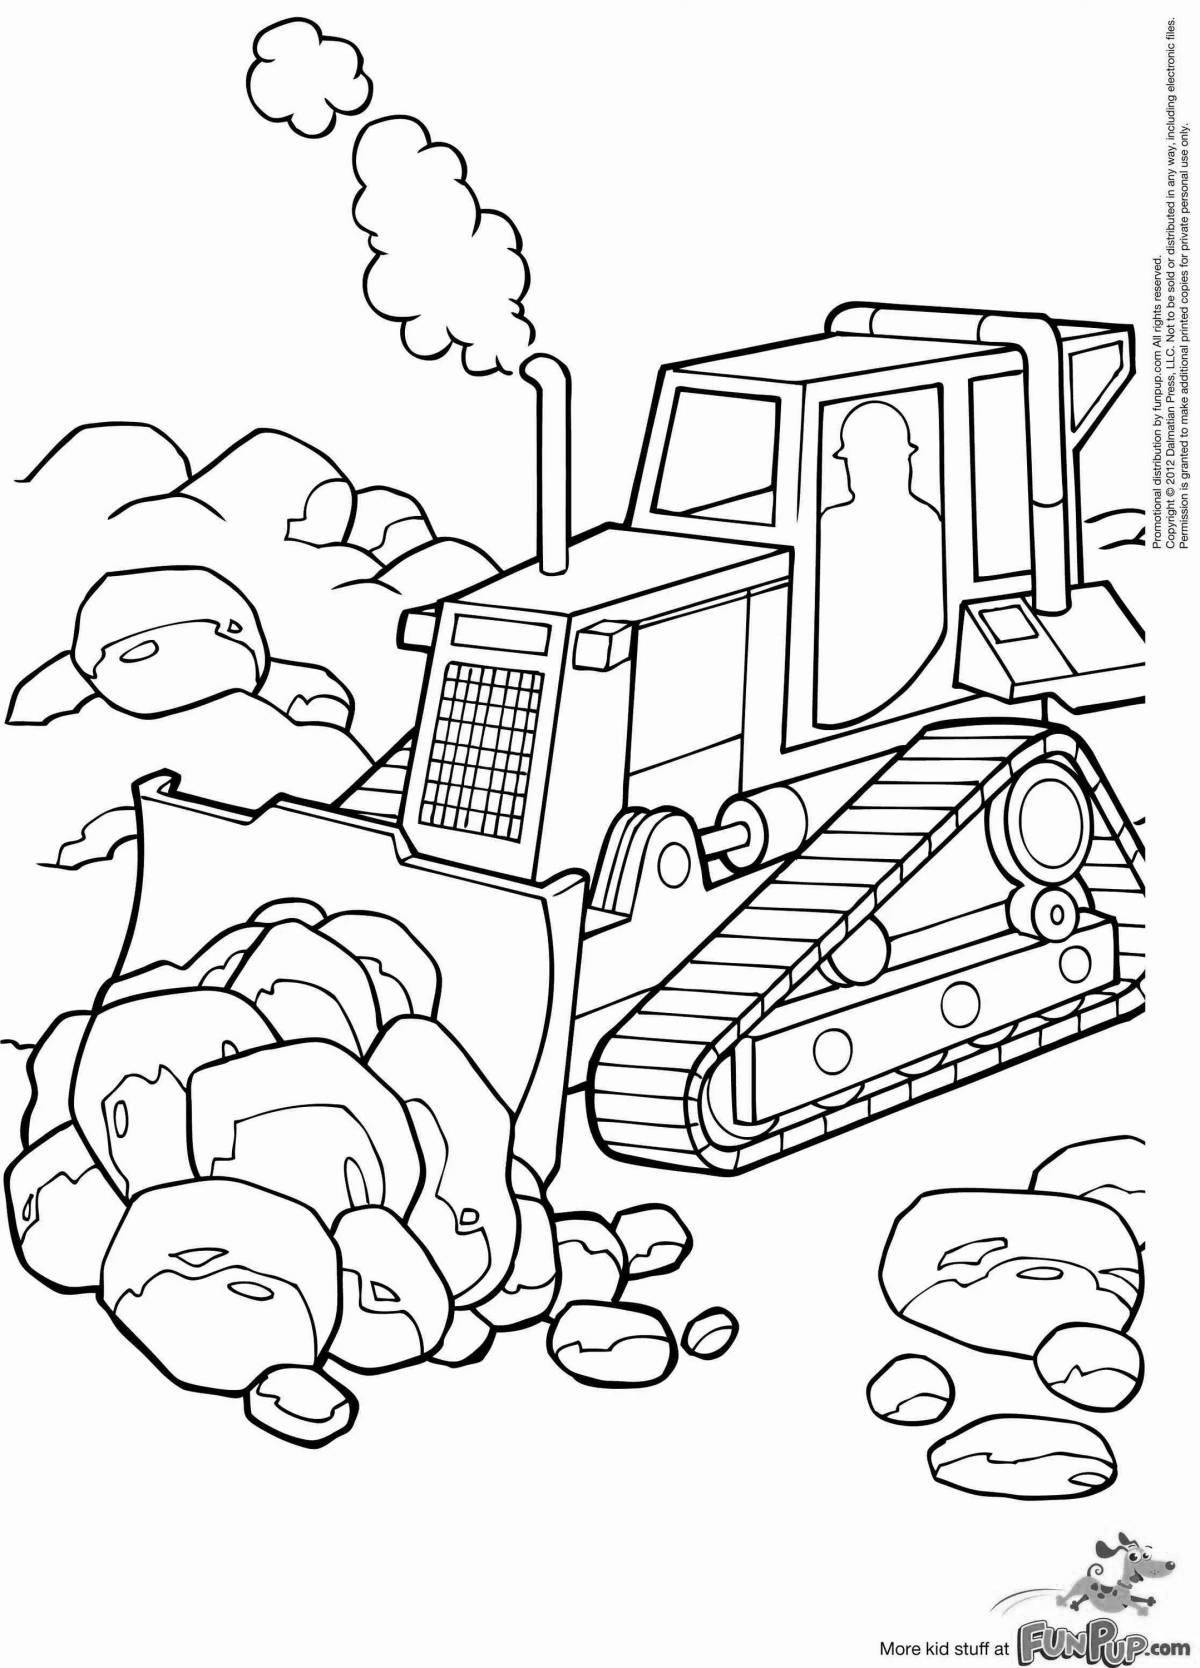 Glitter snowplow coloring book for kids